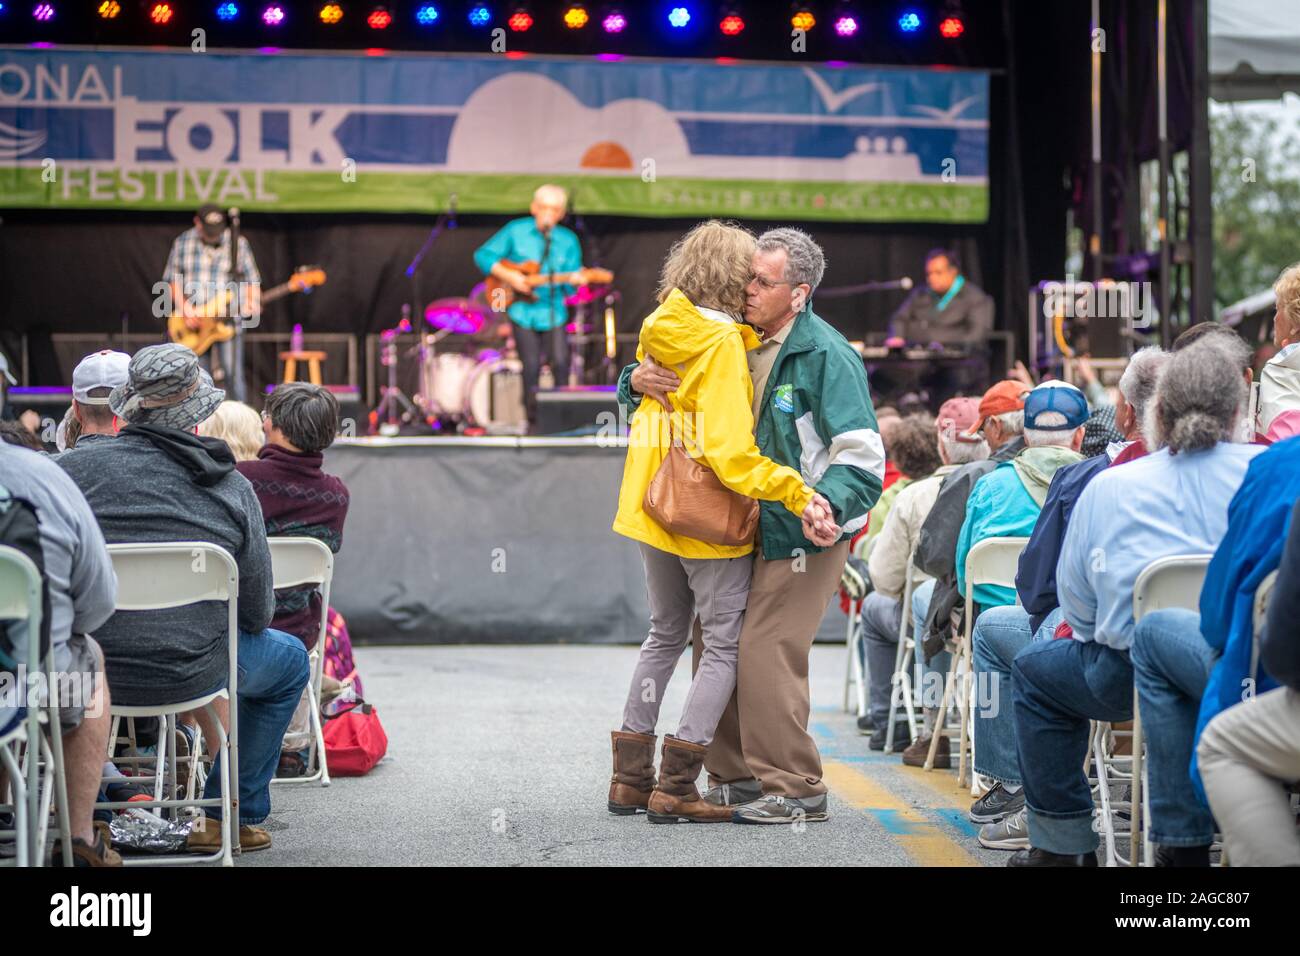 A couple dancing to the performance of Daryl Davis and Bill Kirchen at the 2019 National Folk Festival , Salisbury, Maryland, USA Stock Photo